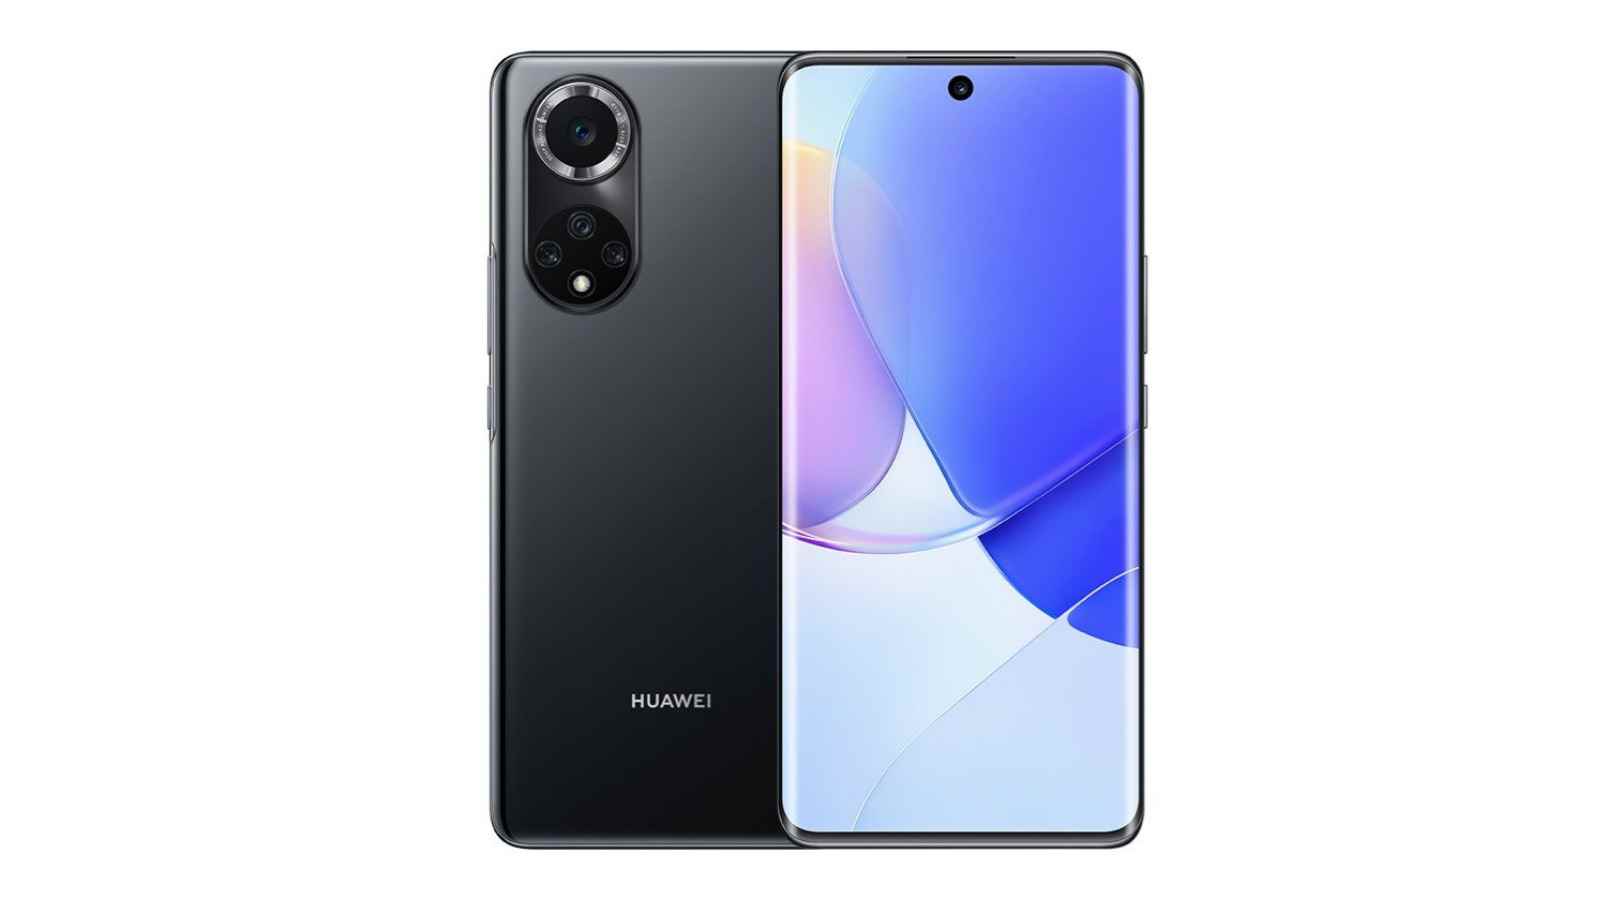 Huawei Nova 9 with Snapdragon 778G, 120Hz OLED display launched in Europe: Price, Specifications